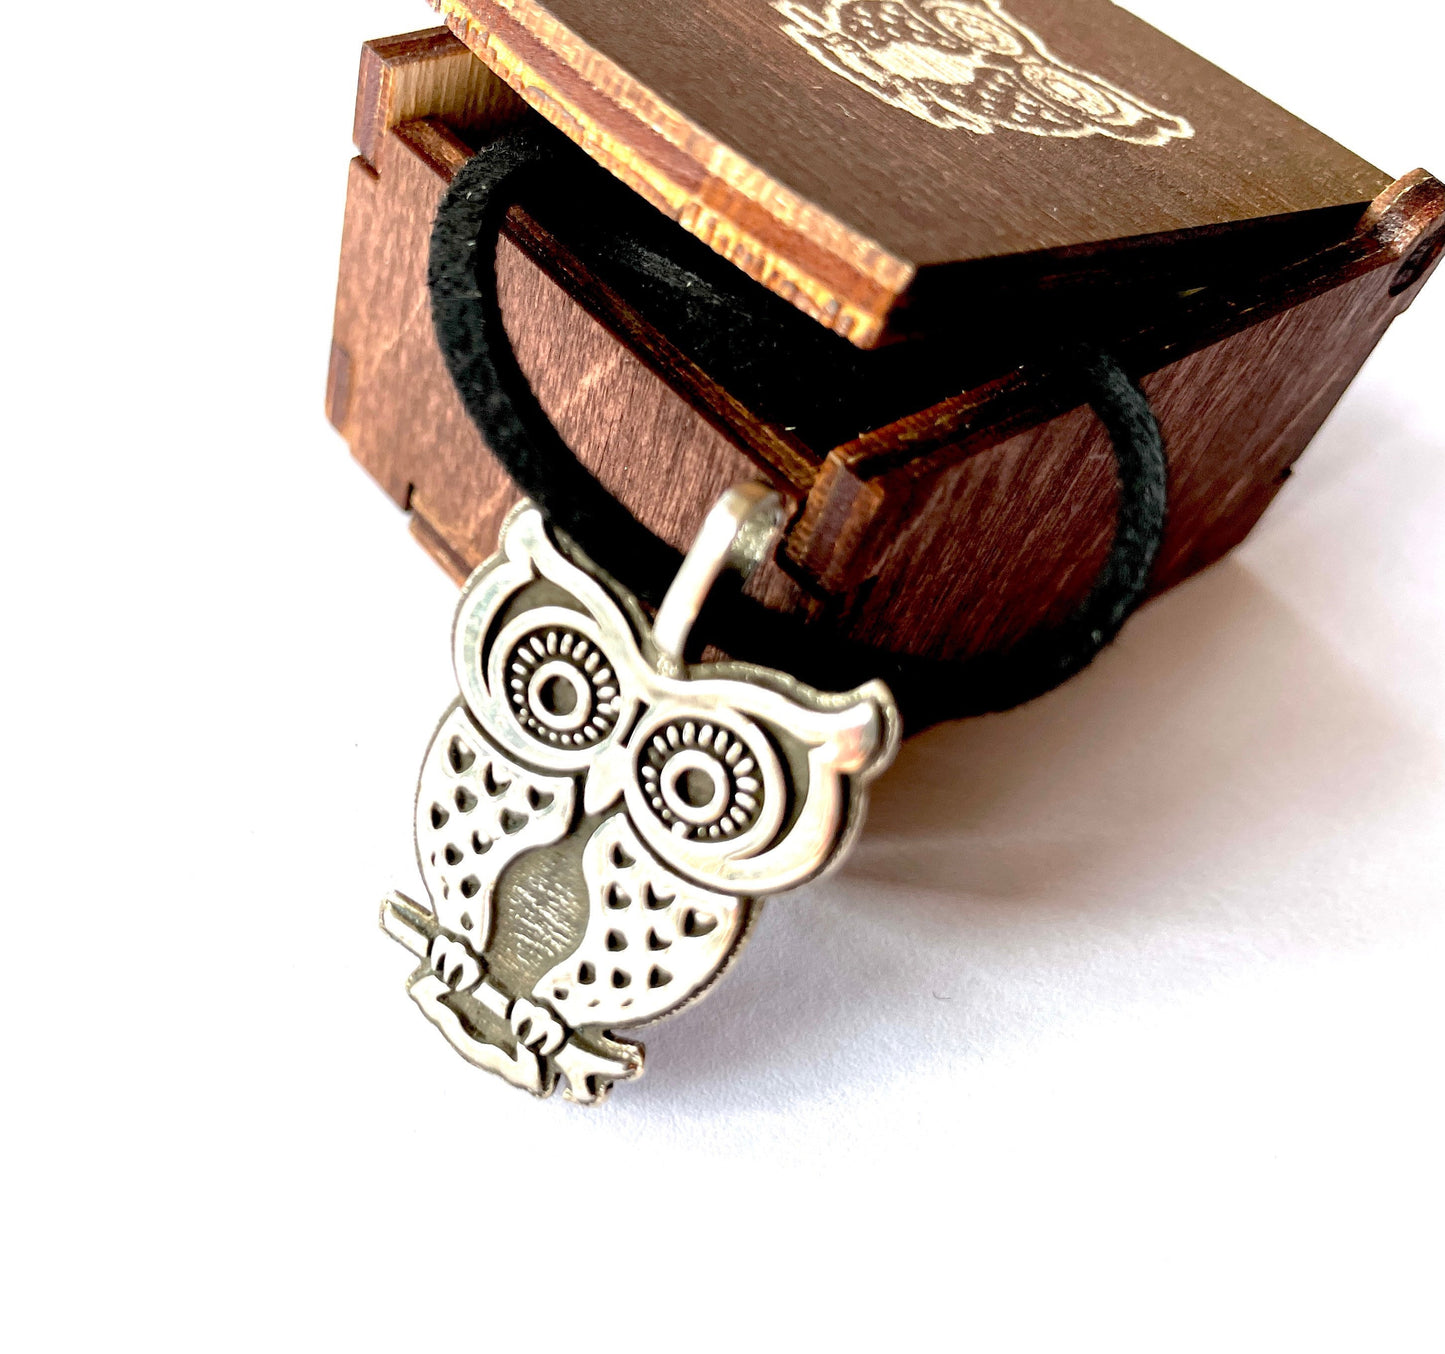 Owl 925 Sterling Silver Pendant Necklace with Keepsake Box